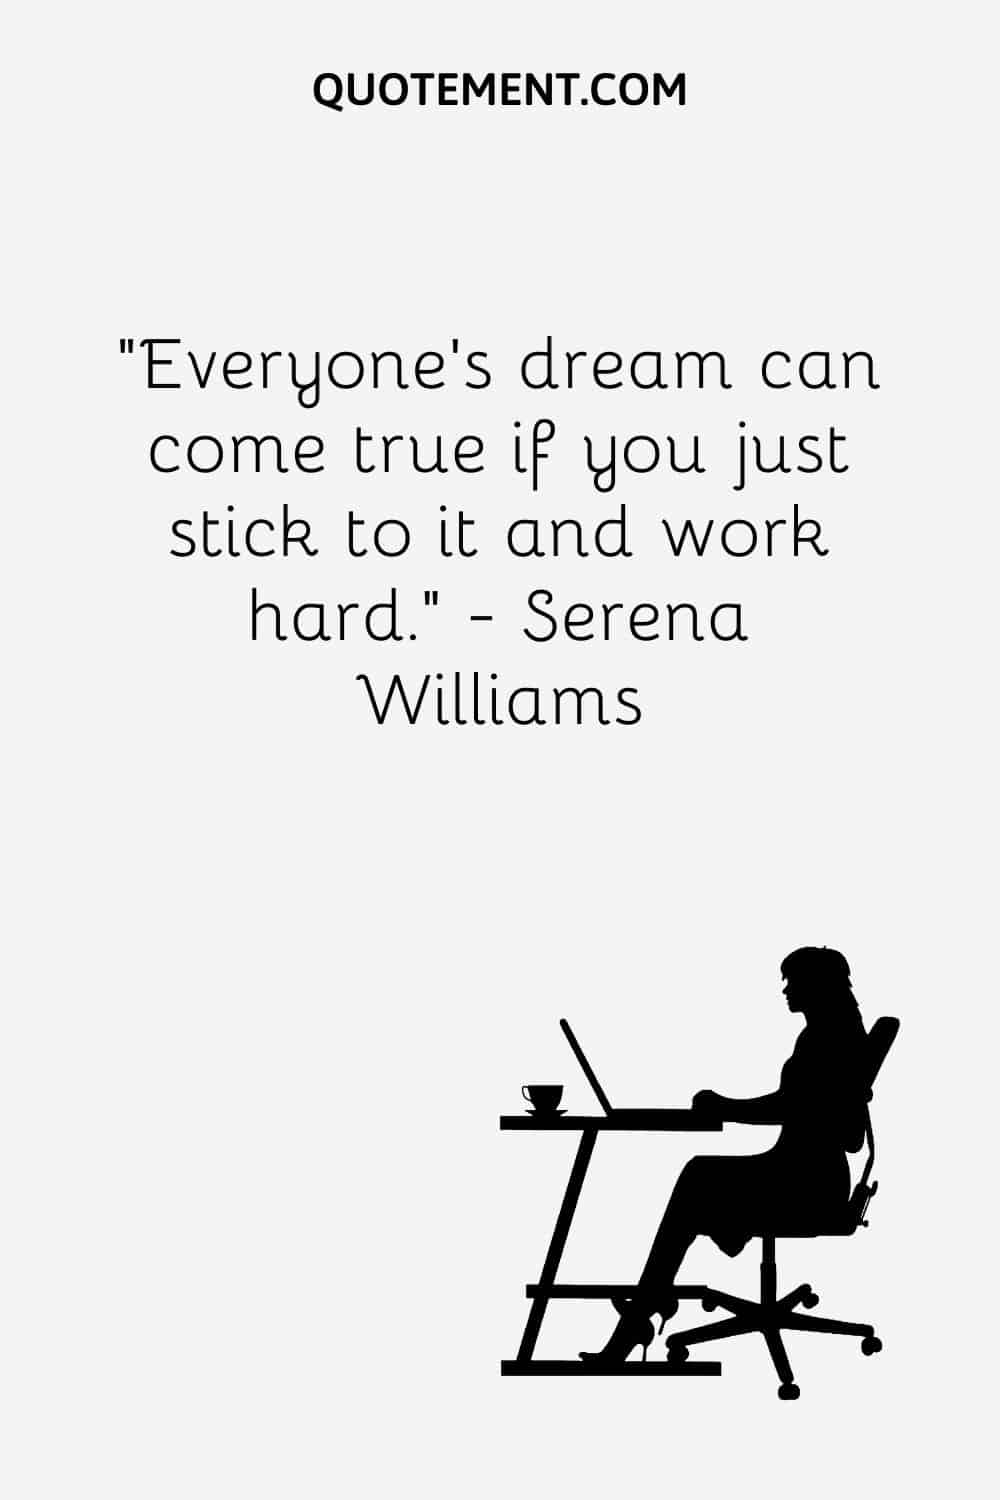 Everyone’s dream can come true if you just stick to it and work hard